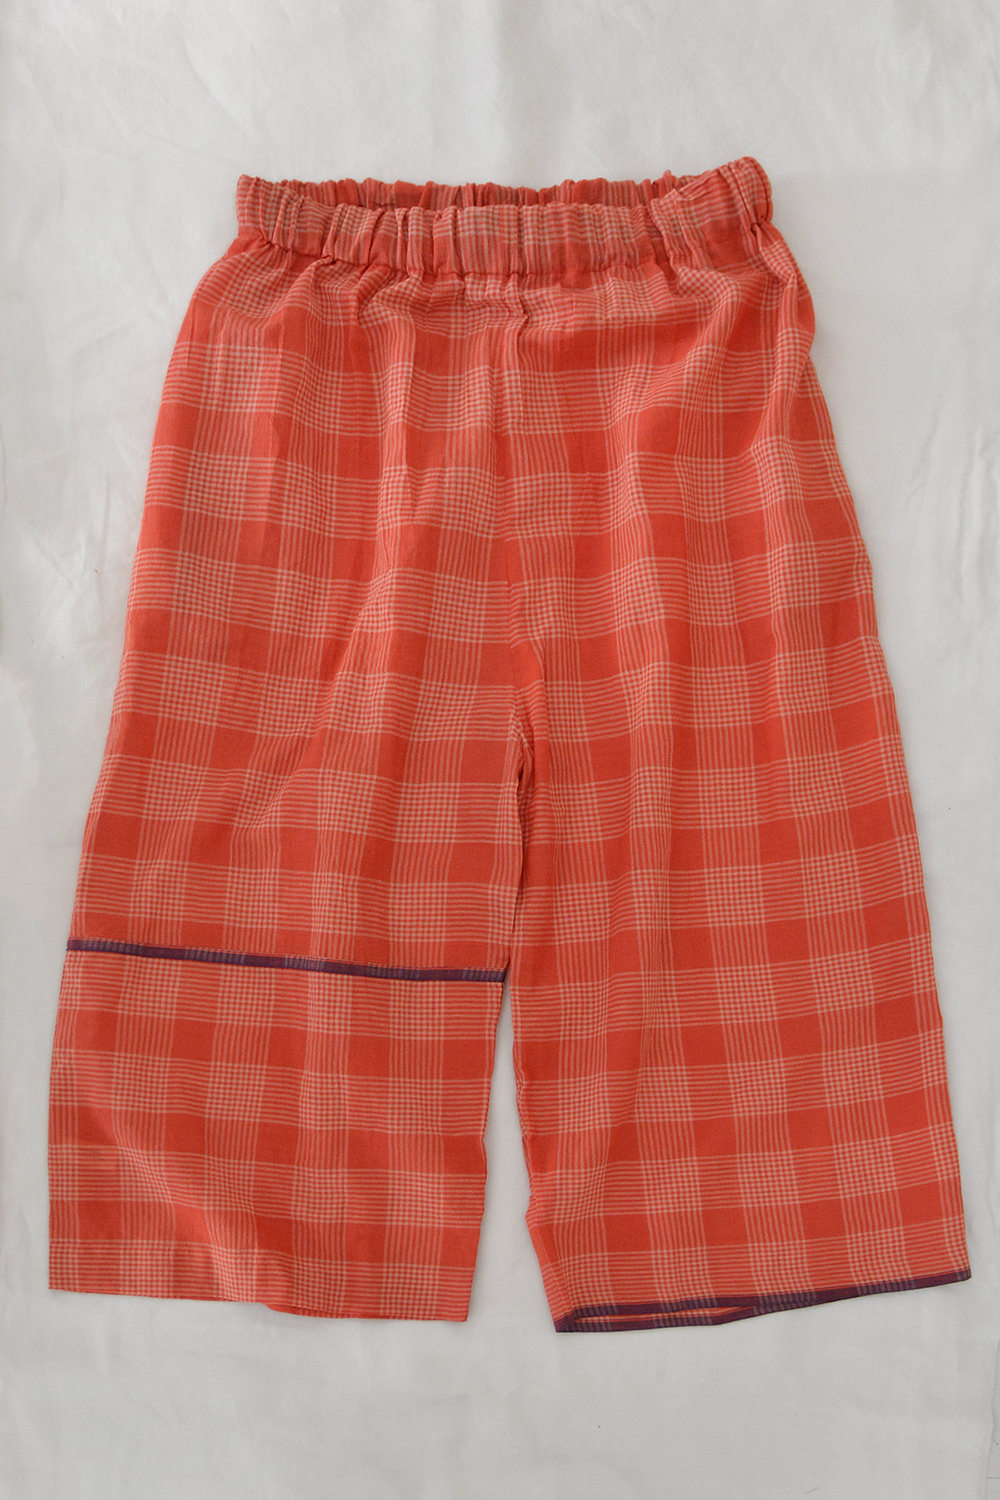 Runaway Bicycle Pants Red Check Top Picture